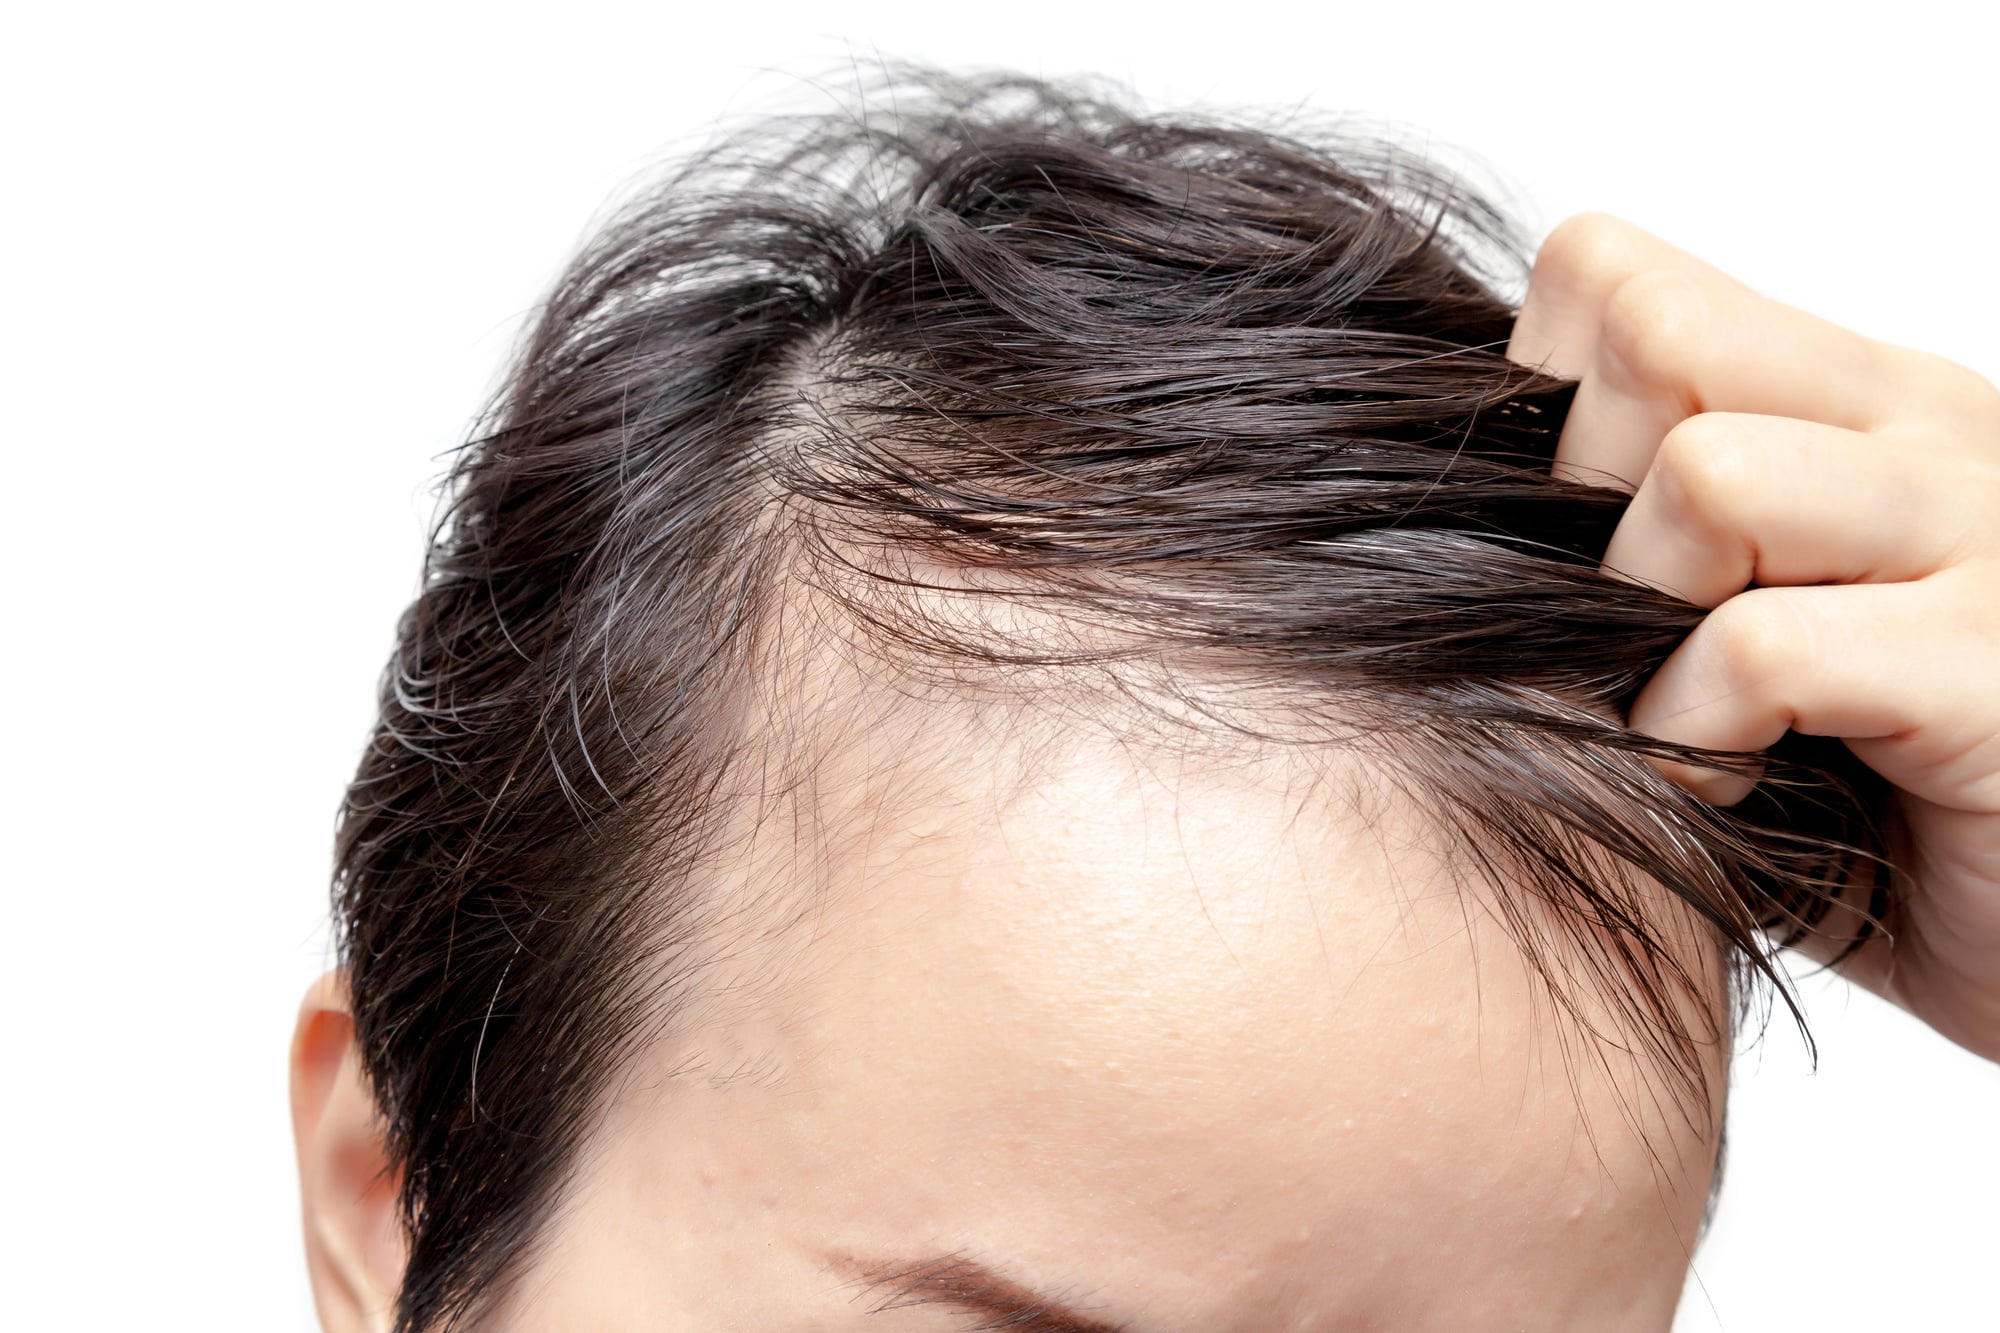 Thinning Hair Signs The Essential Guide to the Signs of